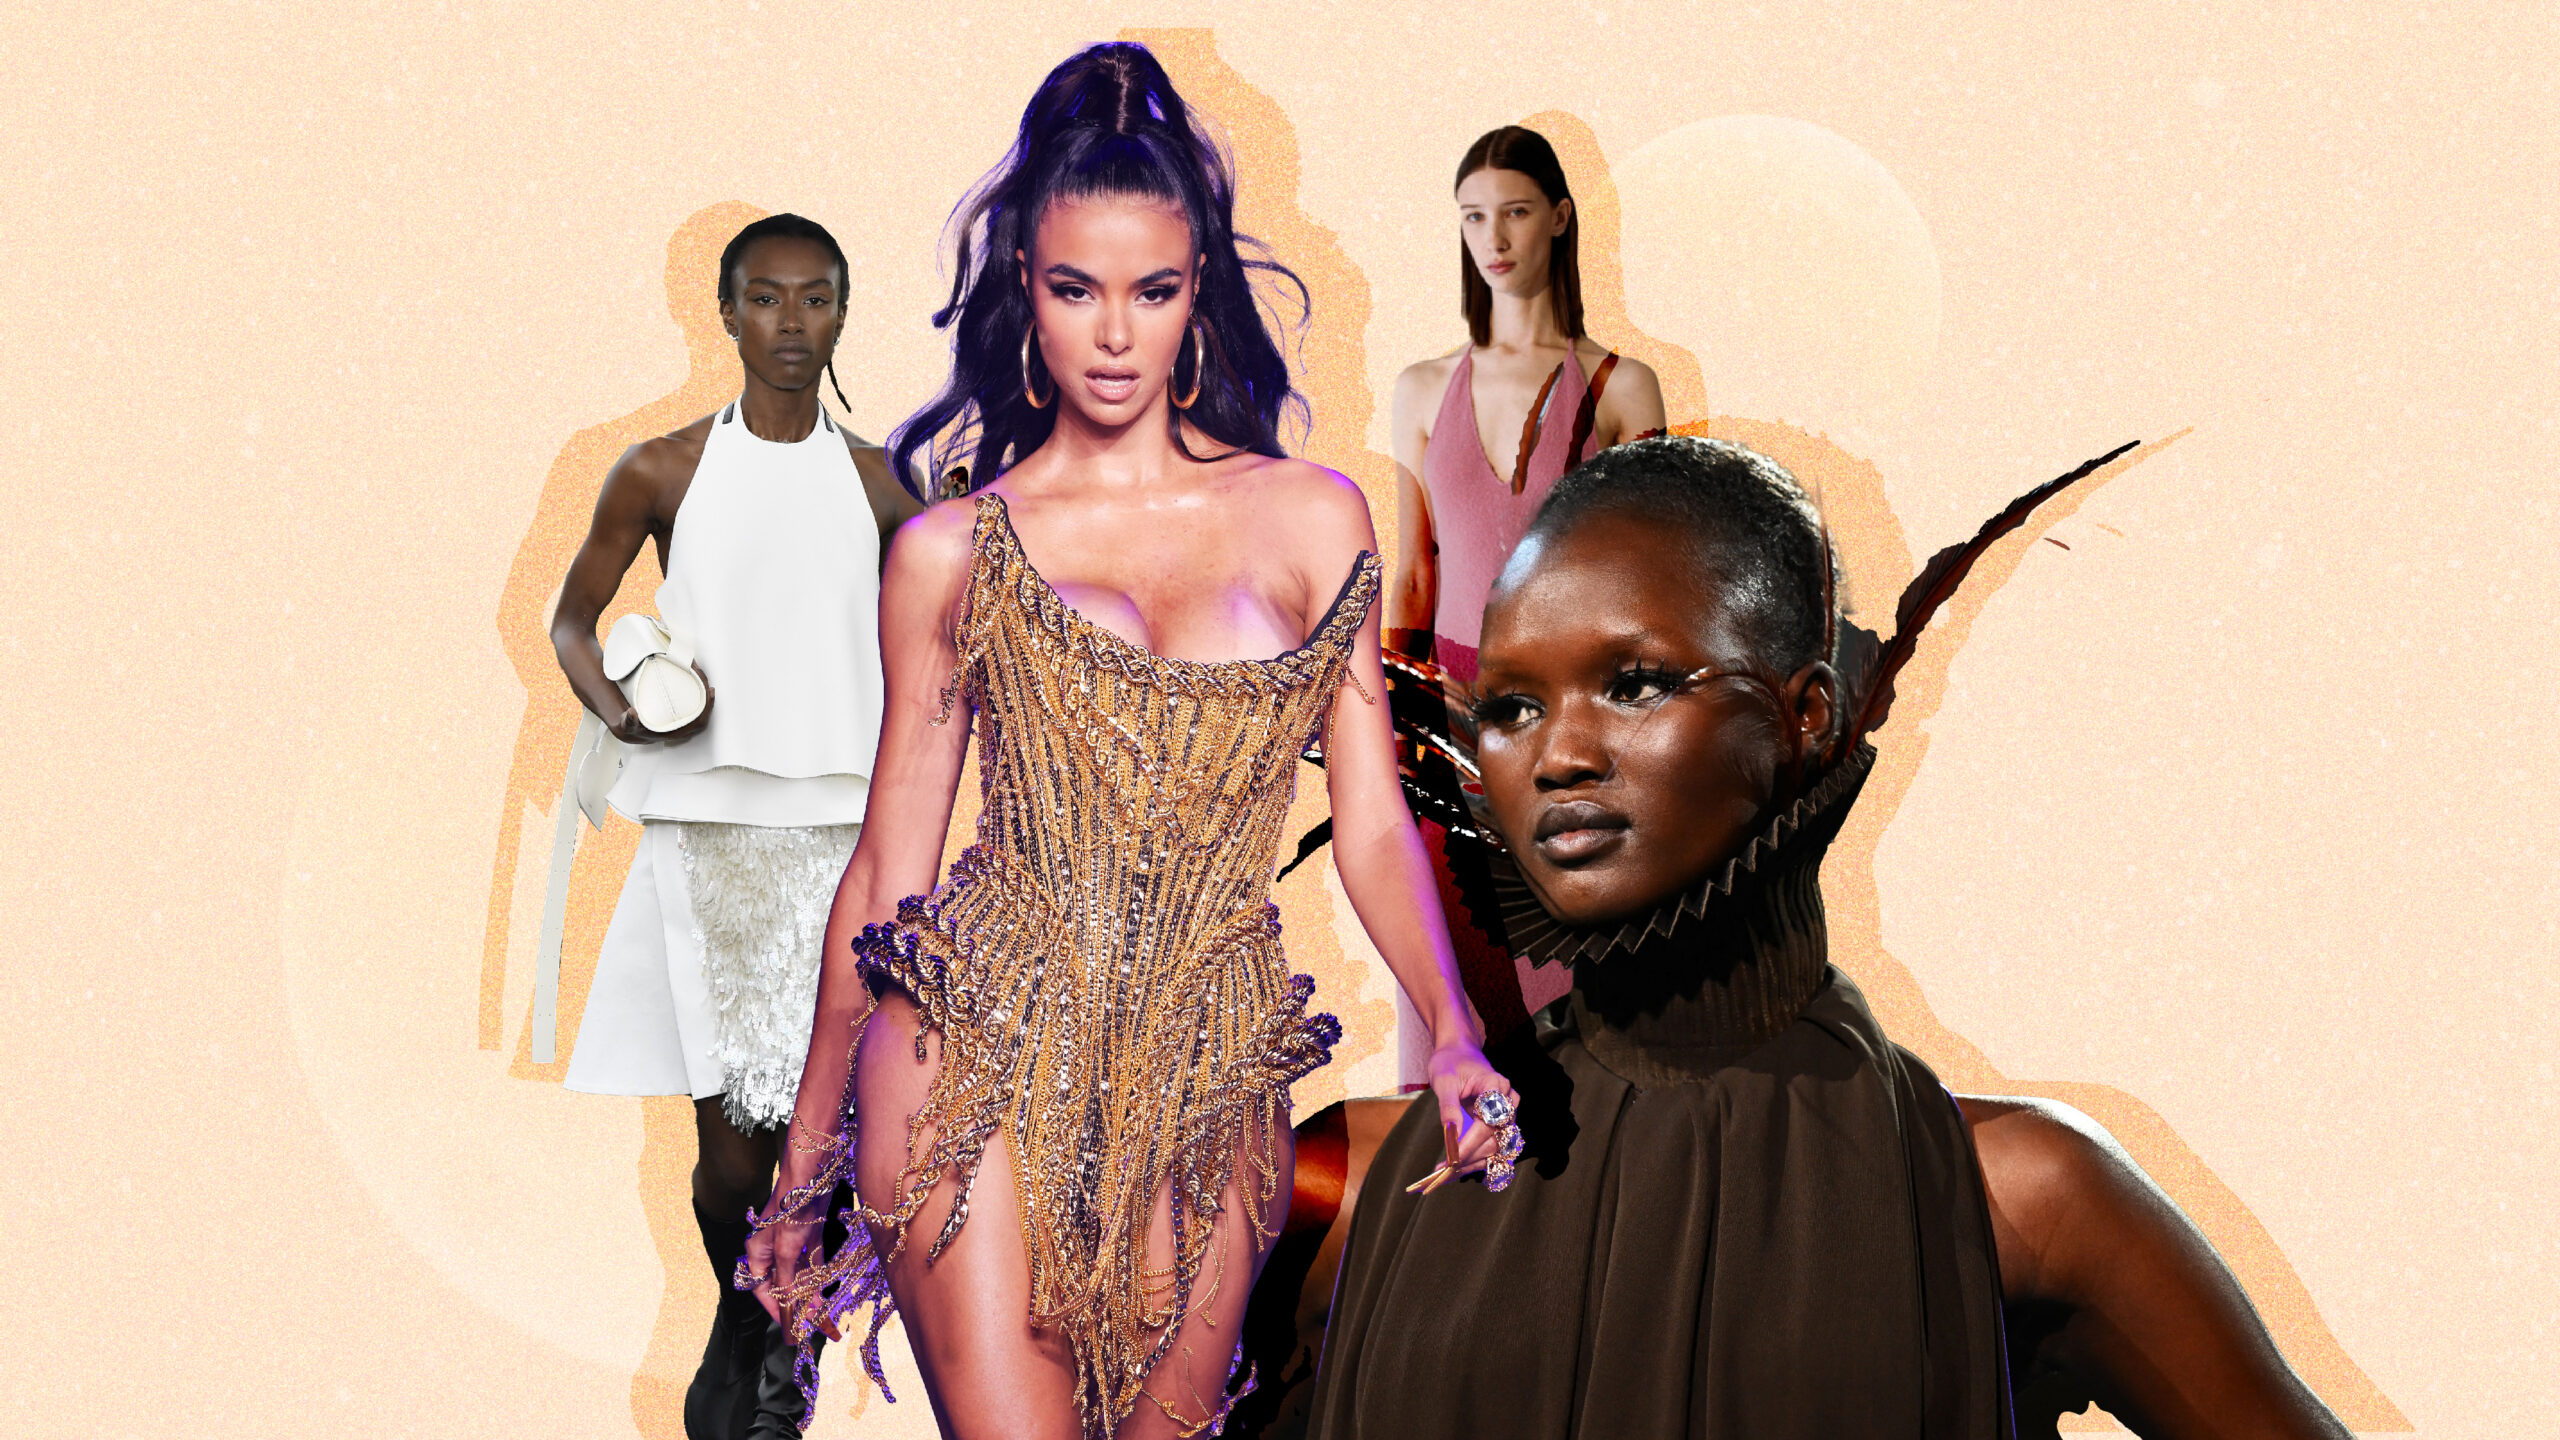 Here’s What Designer Collection You Are According To Your Venus Sign